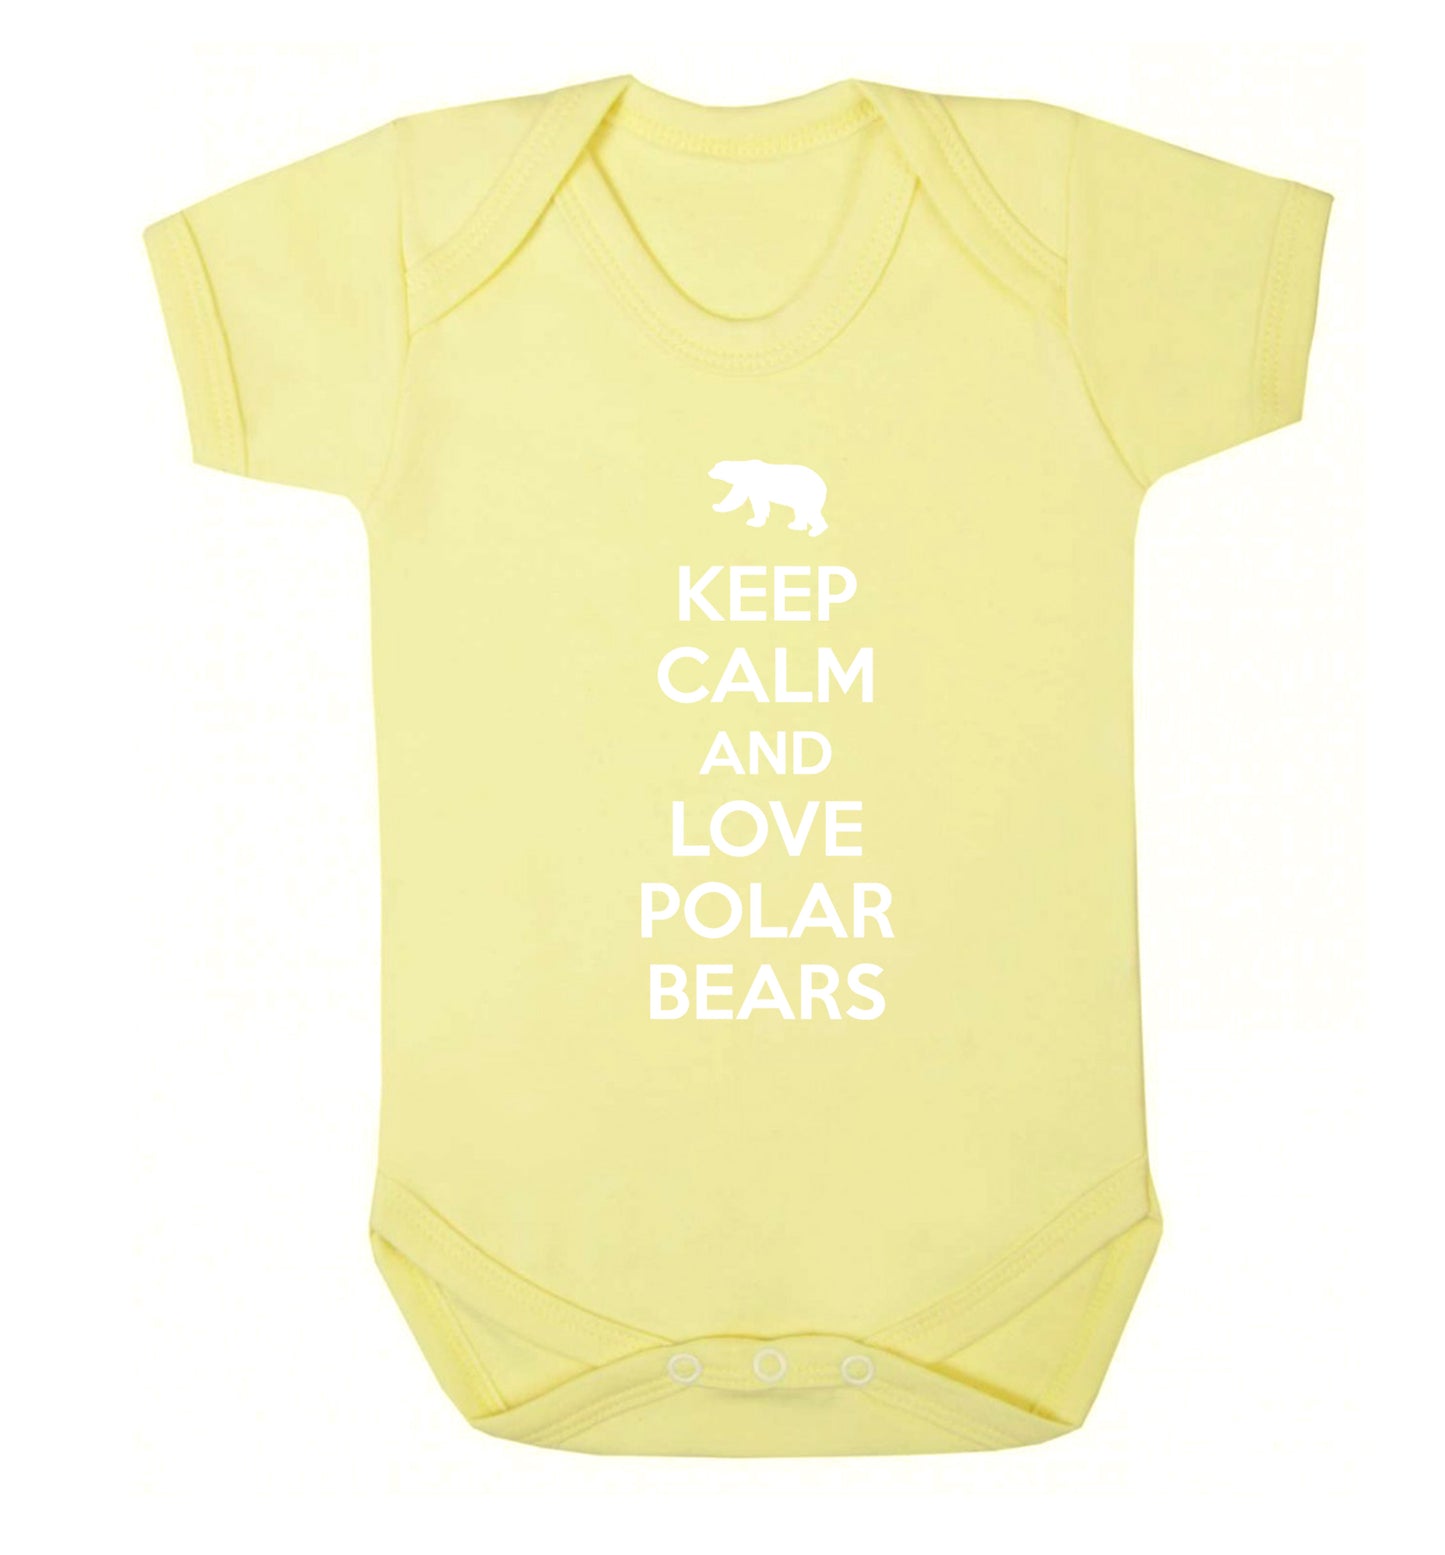 Keep calm and love polar bears Baby Vest pale yellow 18-24 months